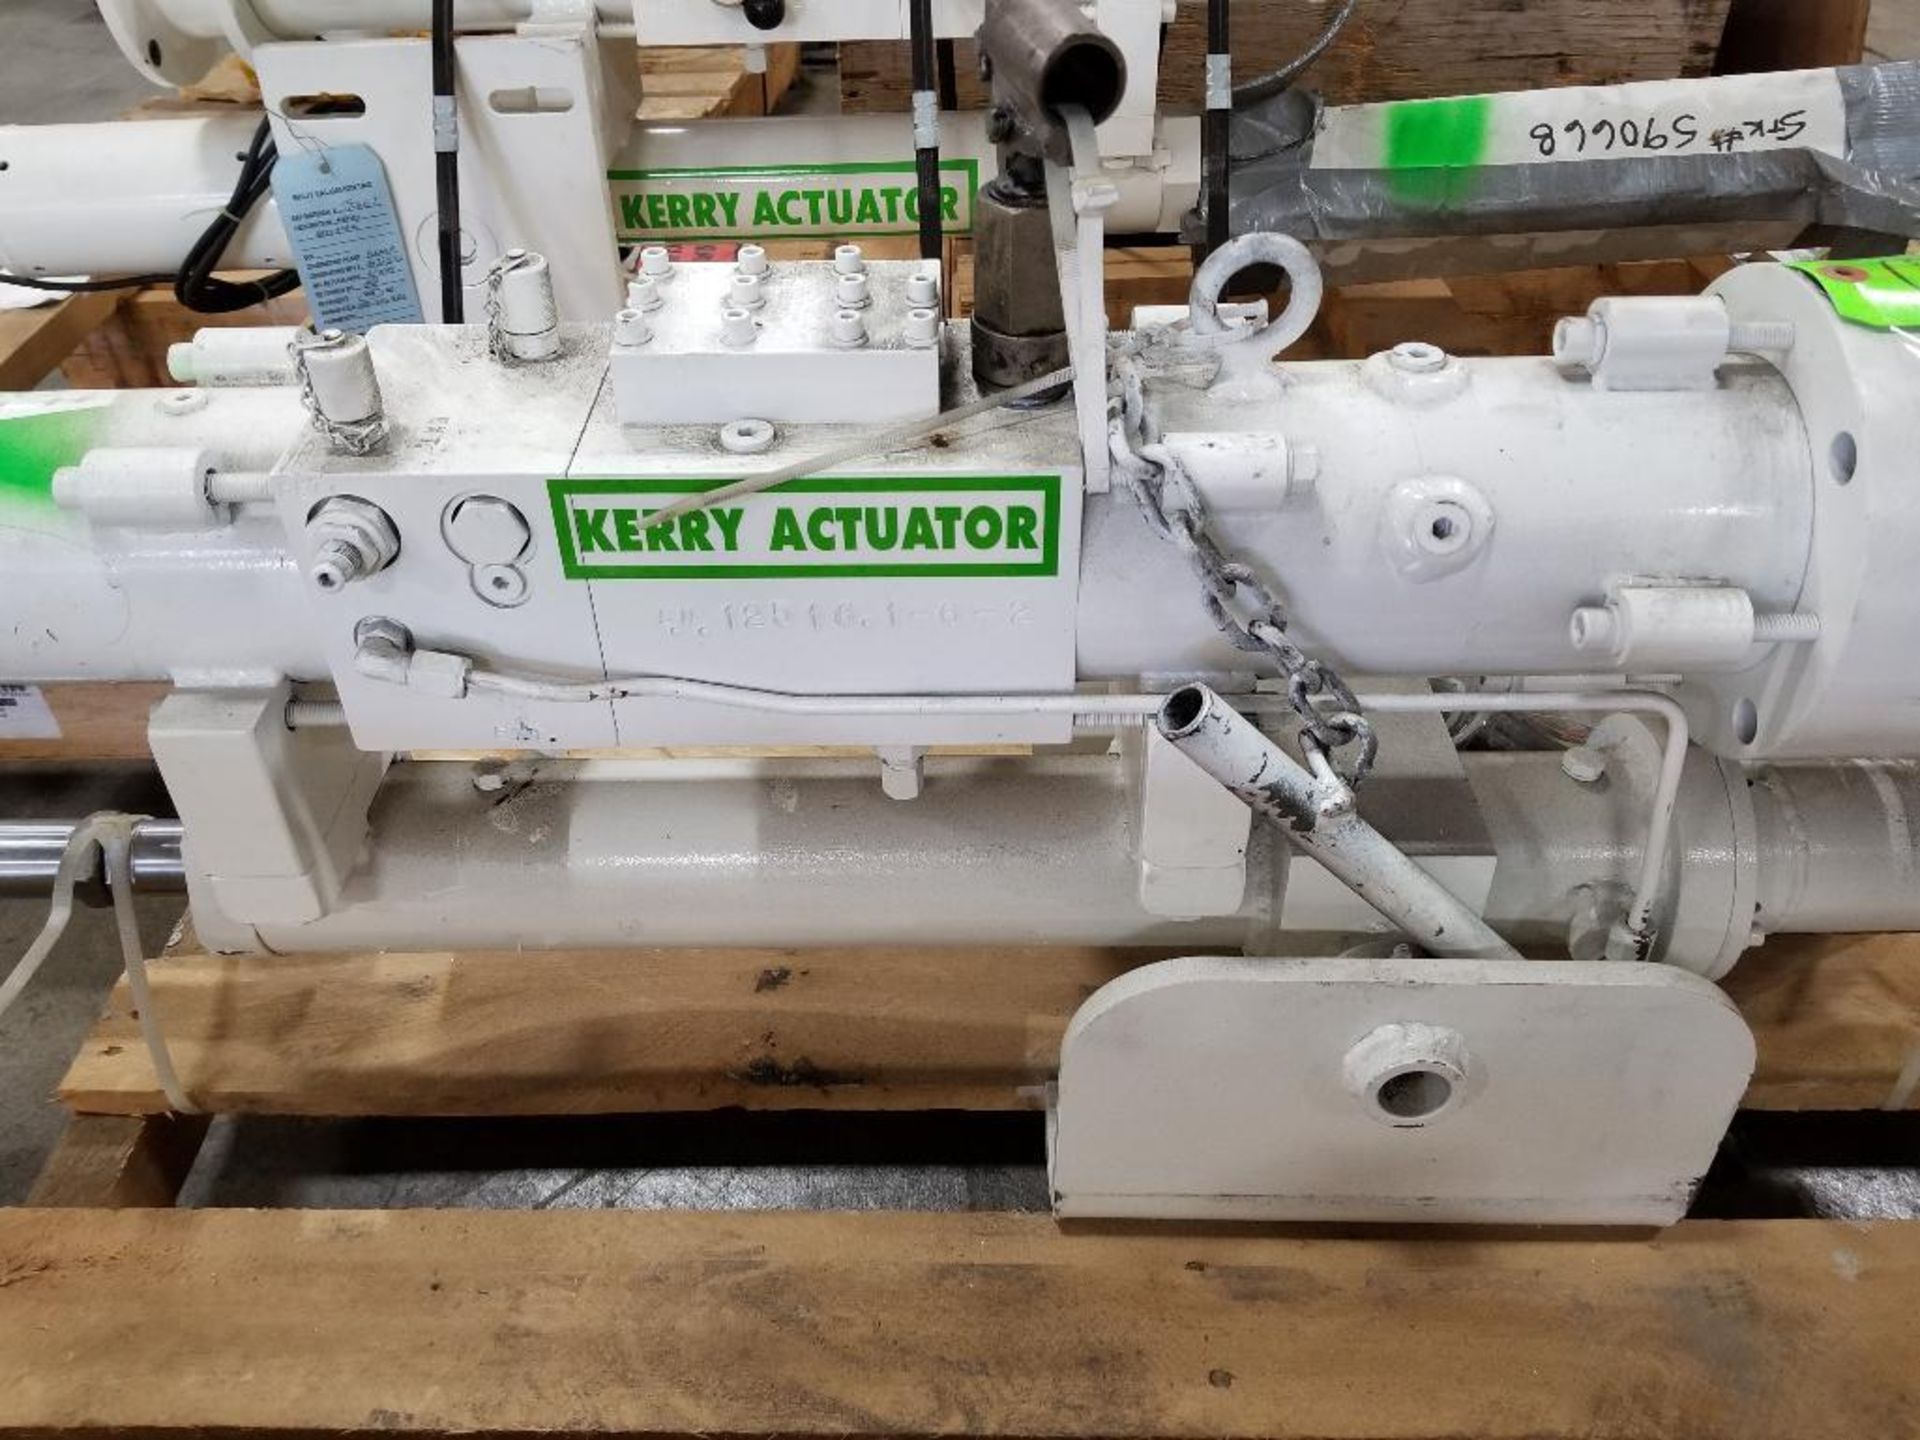 Kerry Actuators B-series 12516.1-6-2. 24". Appears new. - Image 4 of 5